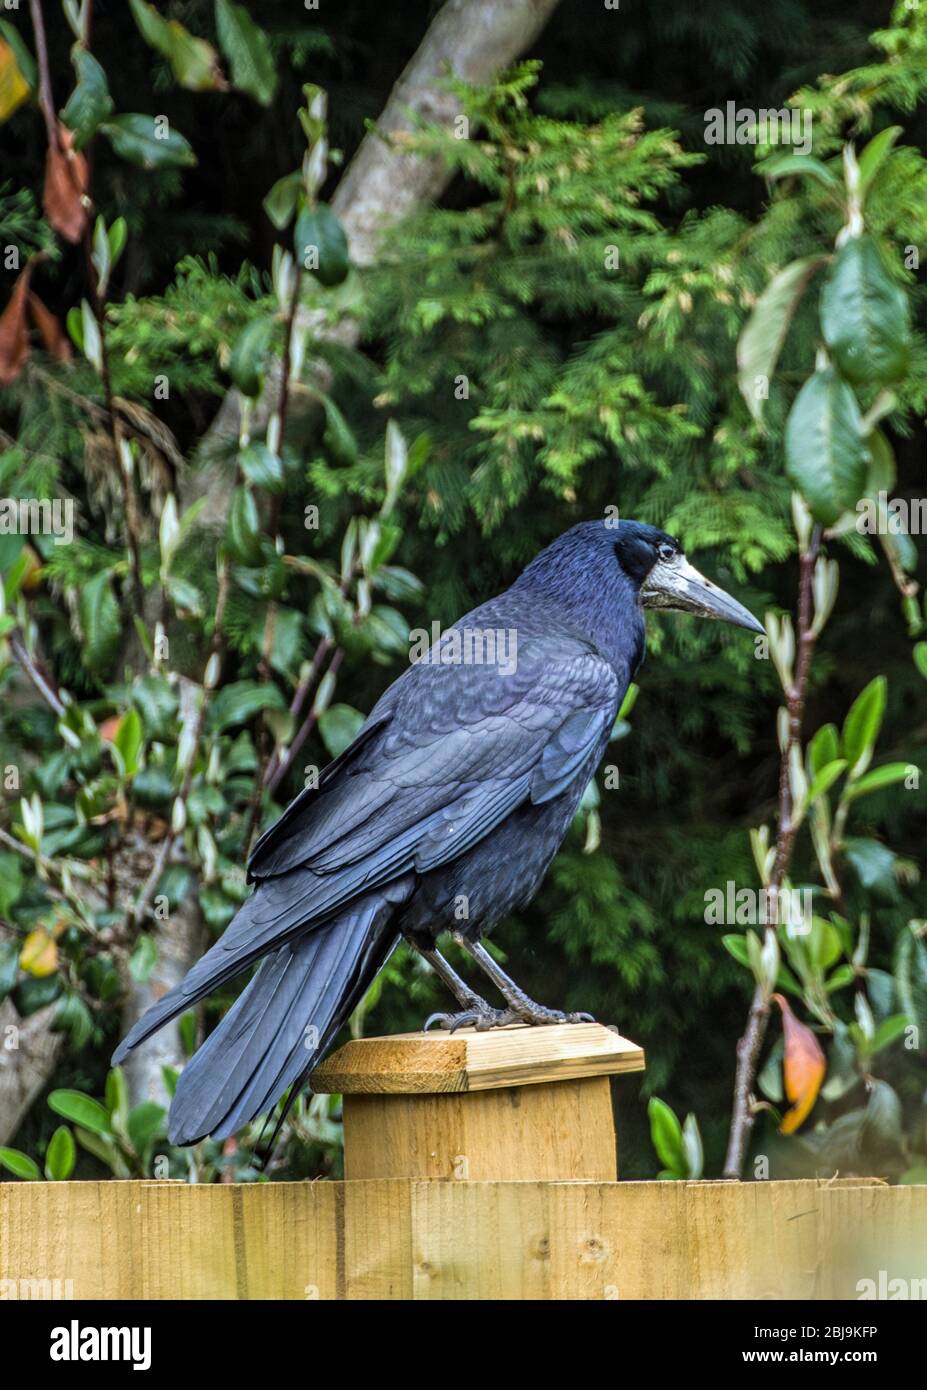 The Rook, Corvus frugilegus, in a back garden in April, Spring Time. A large member of the crow family it is easily identified by its white beak Stock Photo